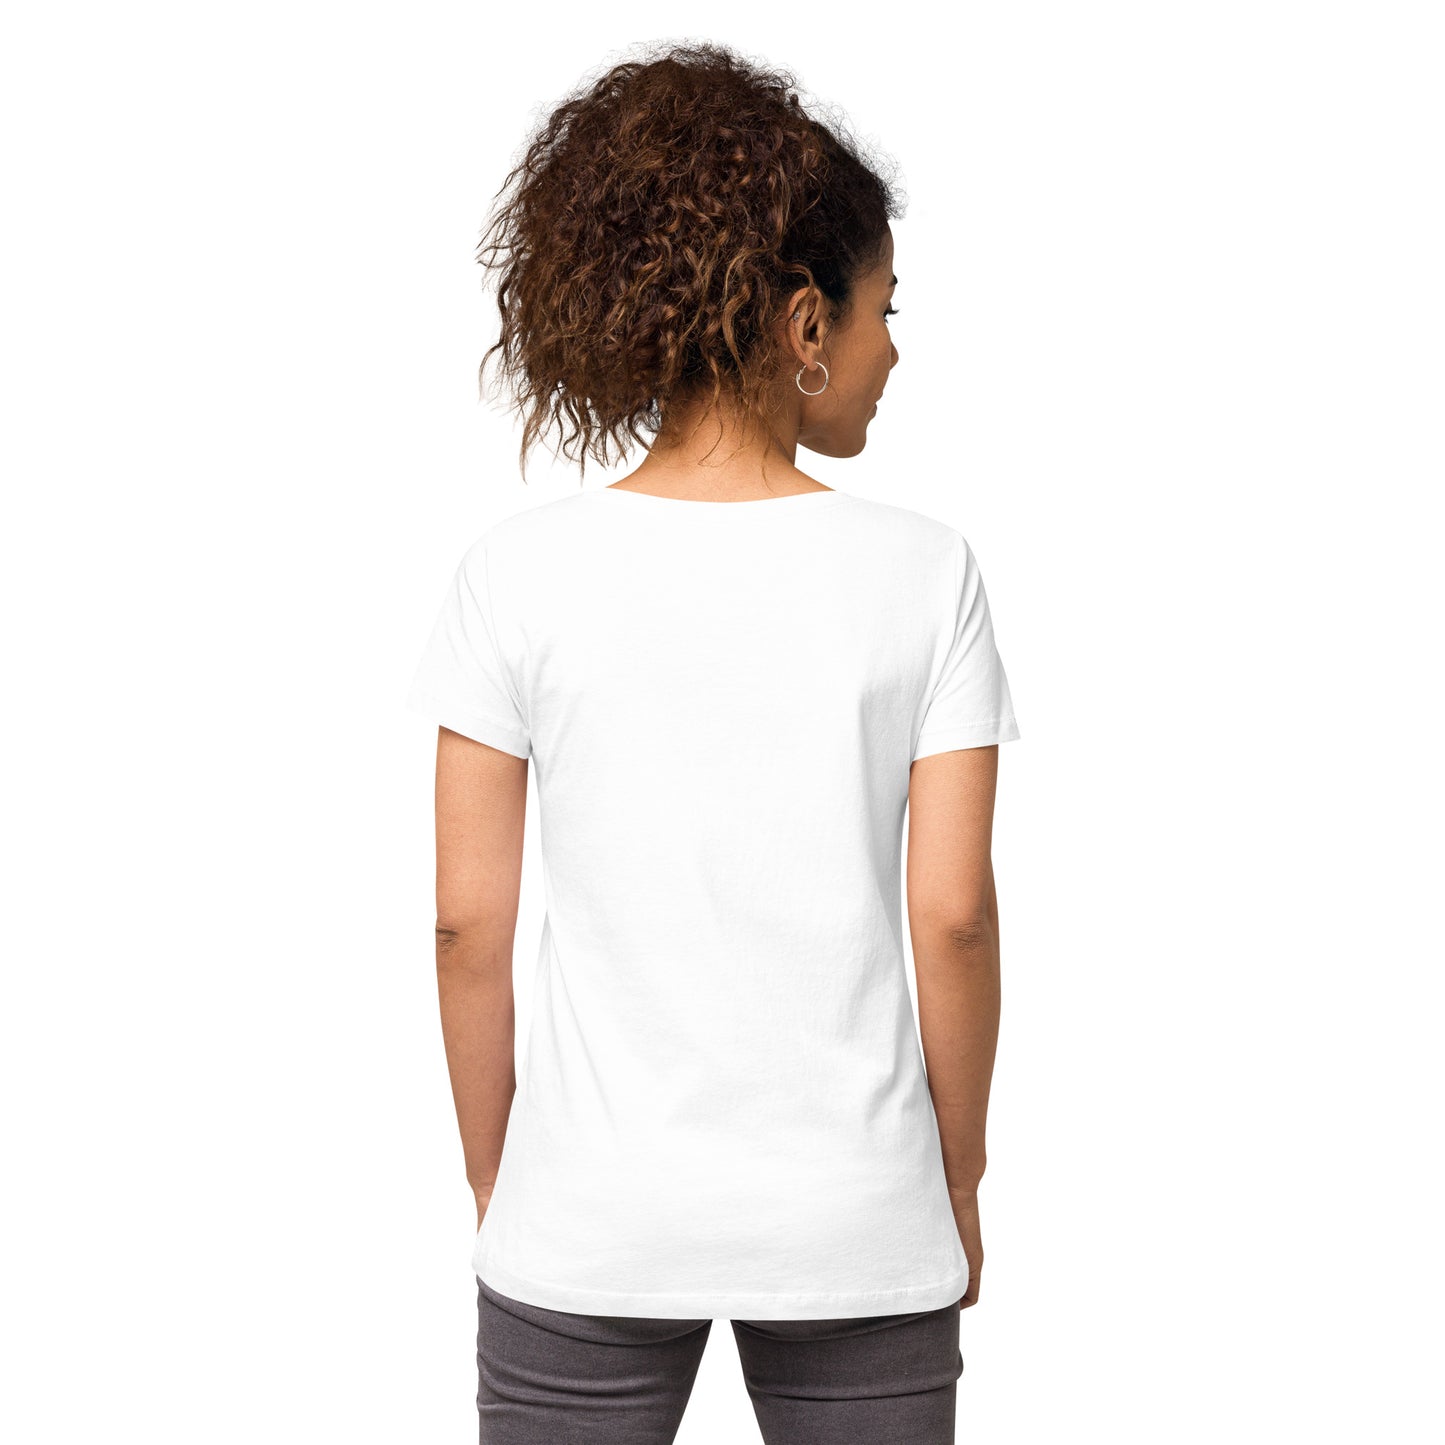 Protect Trans Kids - Women’s fitted v-neck t-shirt